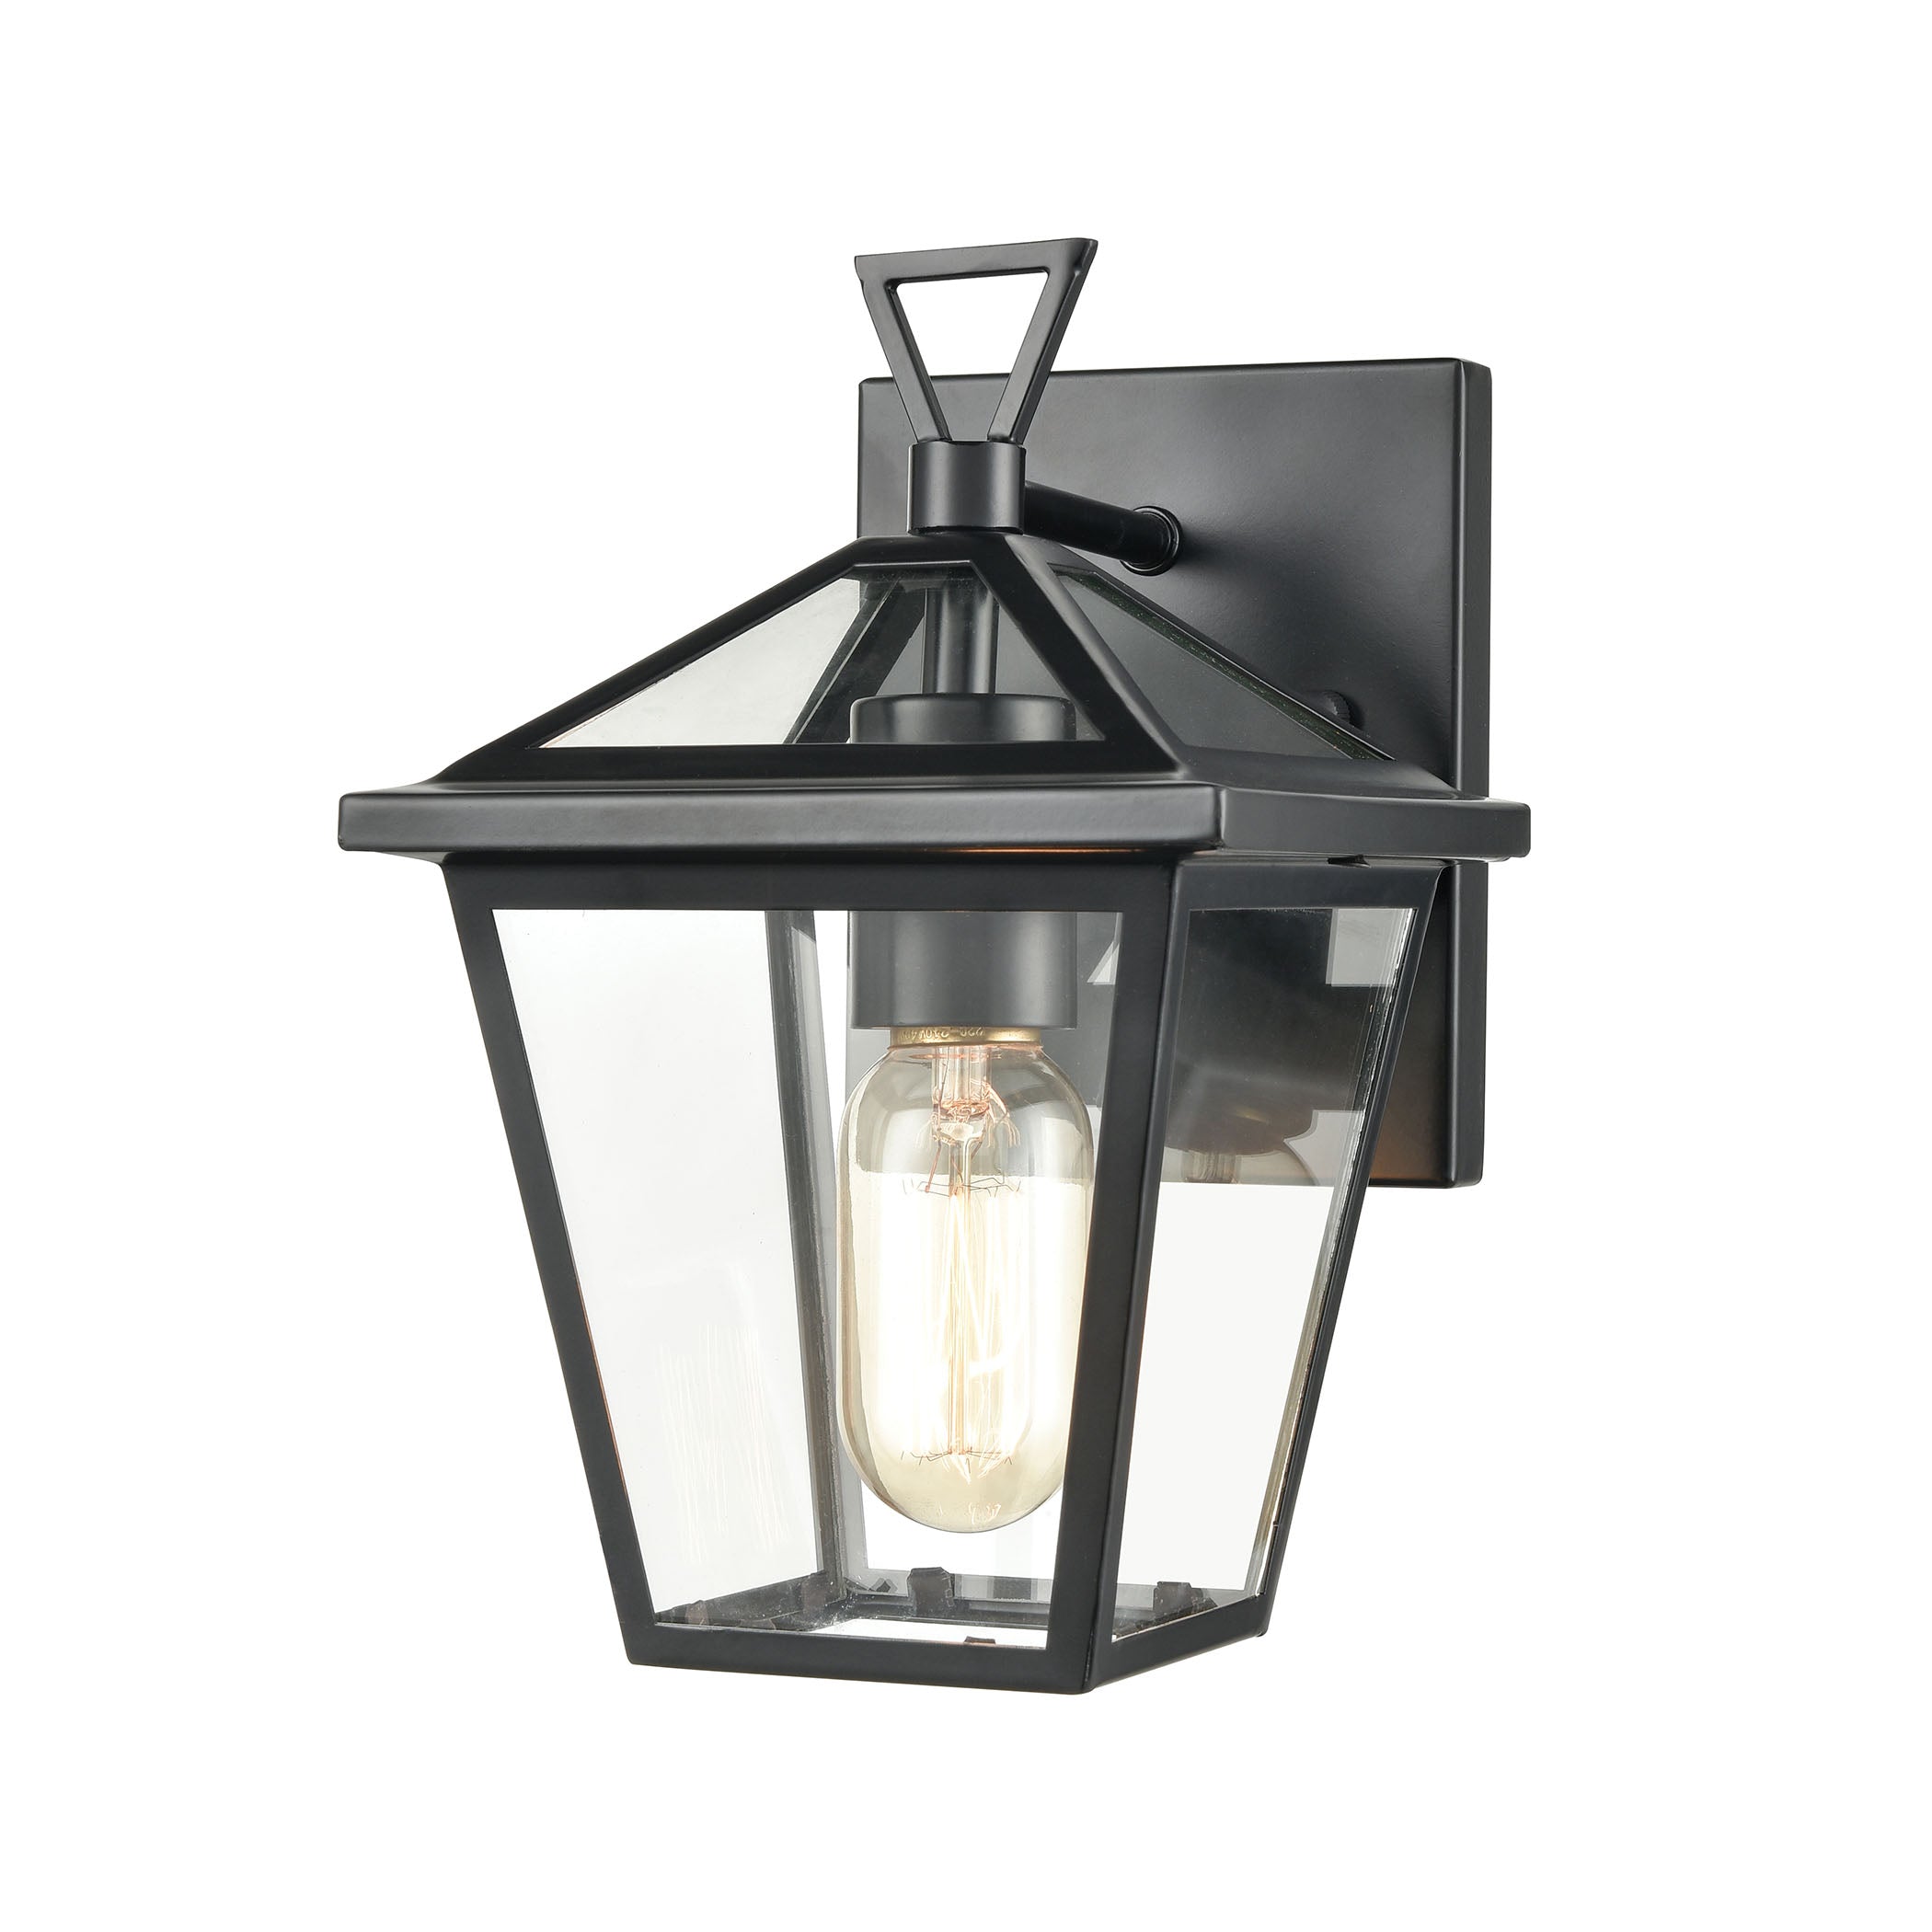 ELK Lighting 45470/1 Main Street 1-Light Outdoor Sconce in Black with Clear Glass Enclosure